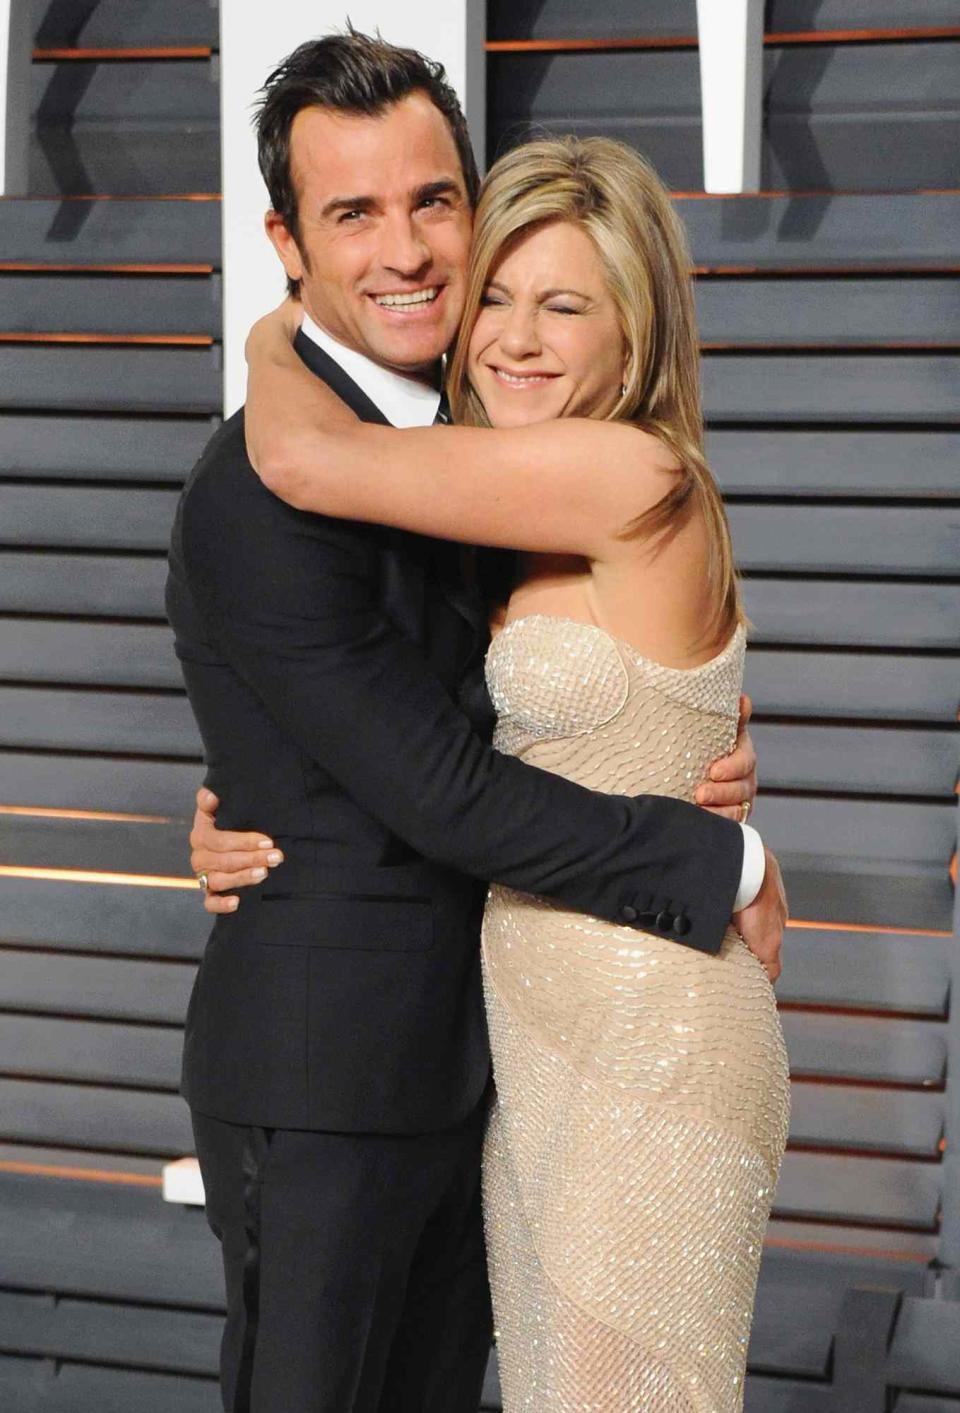 Justin Theroux and actress Jennifer Aniston arrive at the 2015 Vanity Fair Oscar Party Hosted By Graydon Carter at Wallis Annenberg Center for the Performing Arts on February 22, 2015 in Beverly Hills, California